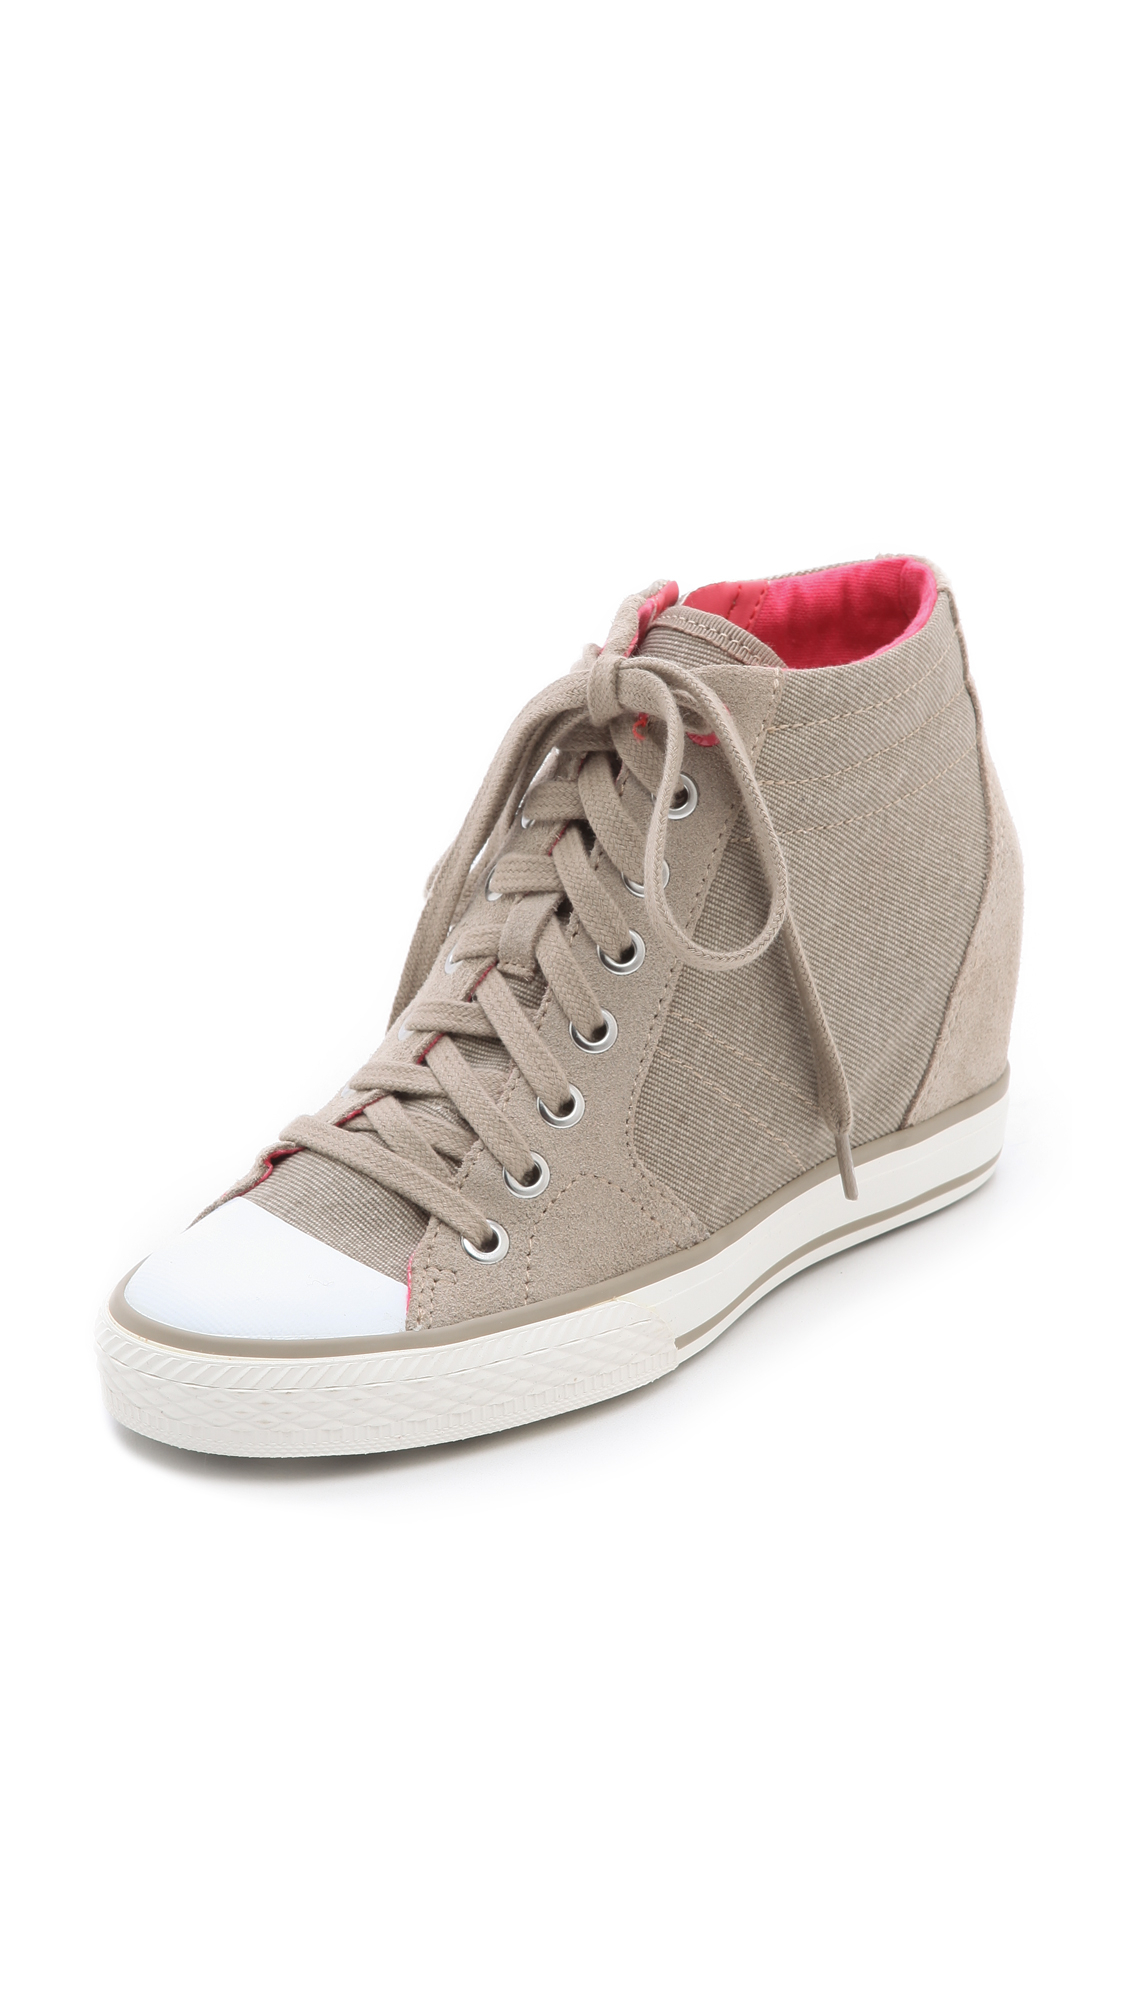 DKNY Cindy Canvas Wedge Sneakers White in Natural | Lyst